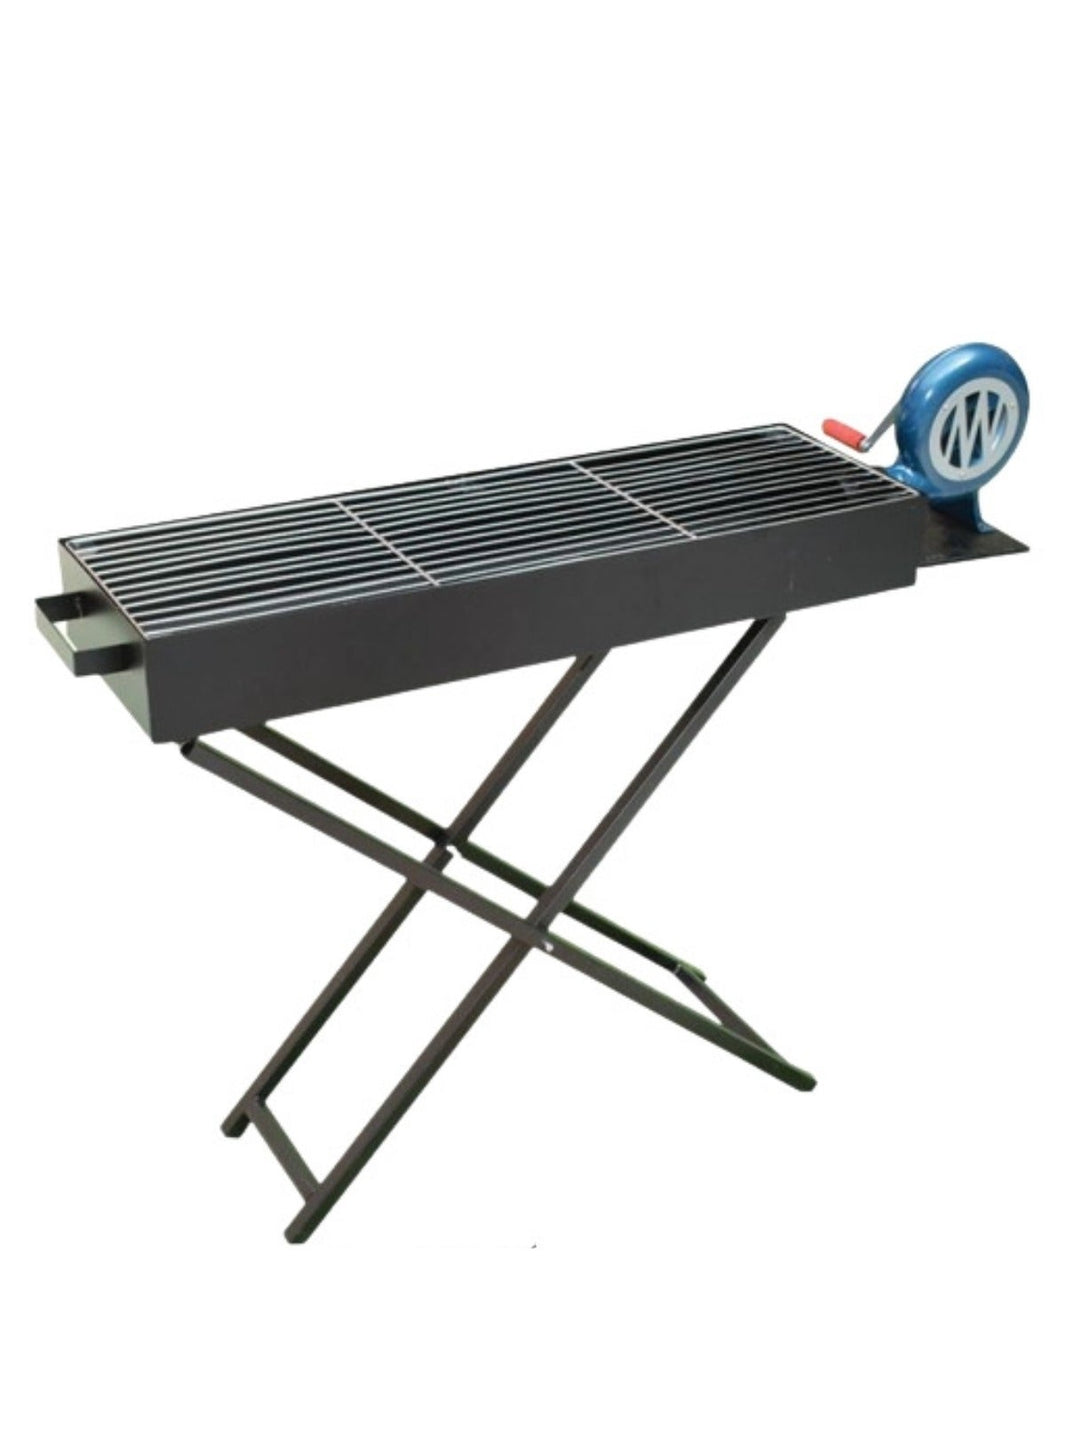 Barbeque grill with blower Fan